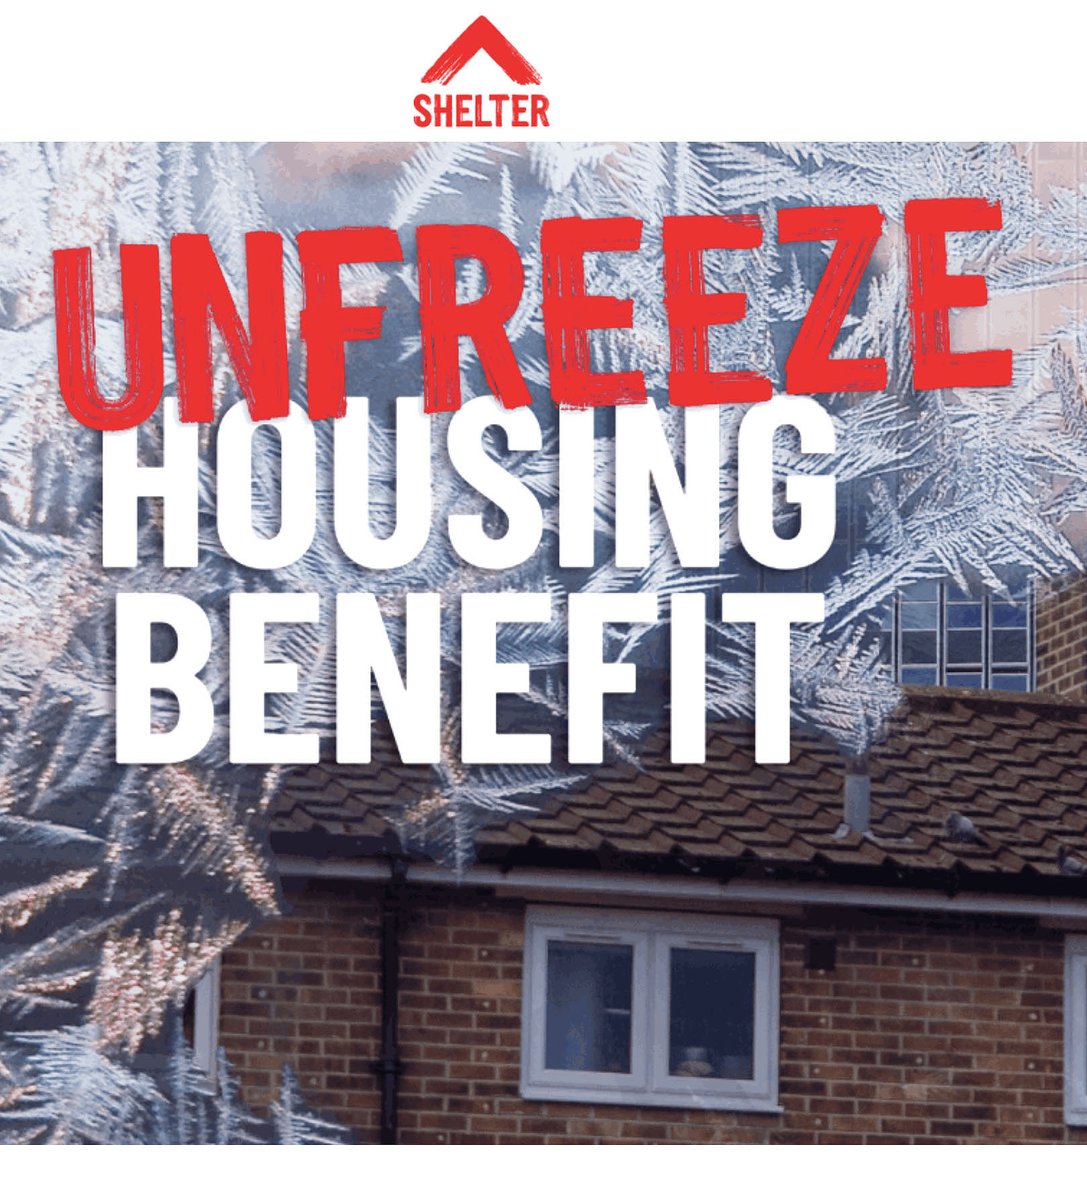 rents continue to rise, punishing the poorest. at the same time housing benefit is frozen. #housing needs major reform - but while we wait for that we must call for parliament to #UnfreezeHousingBenefit. I’ve emailed my MP.

will you please join me?

campaigns.shelter.org.uk/email-your-mp-…